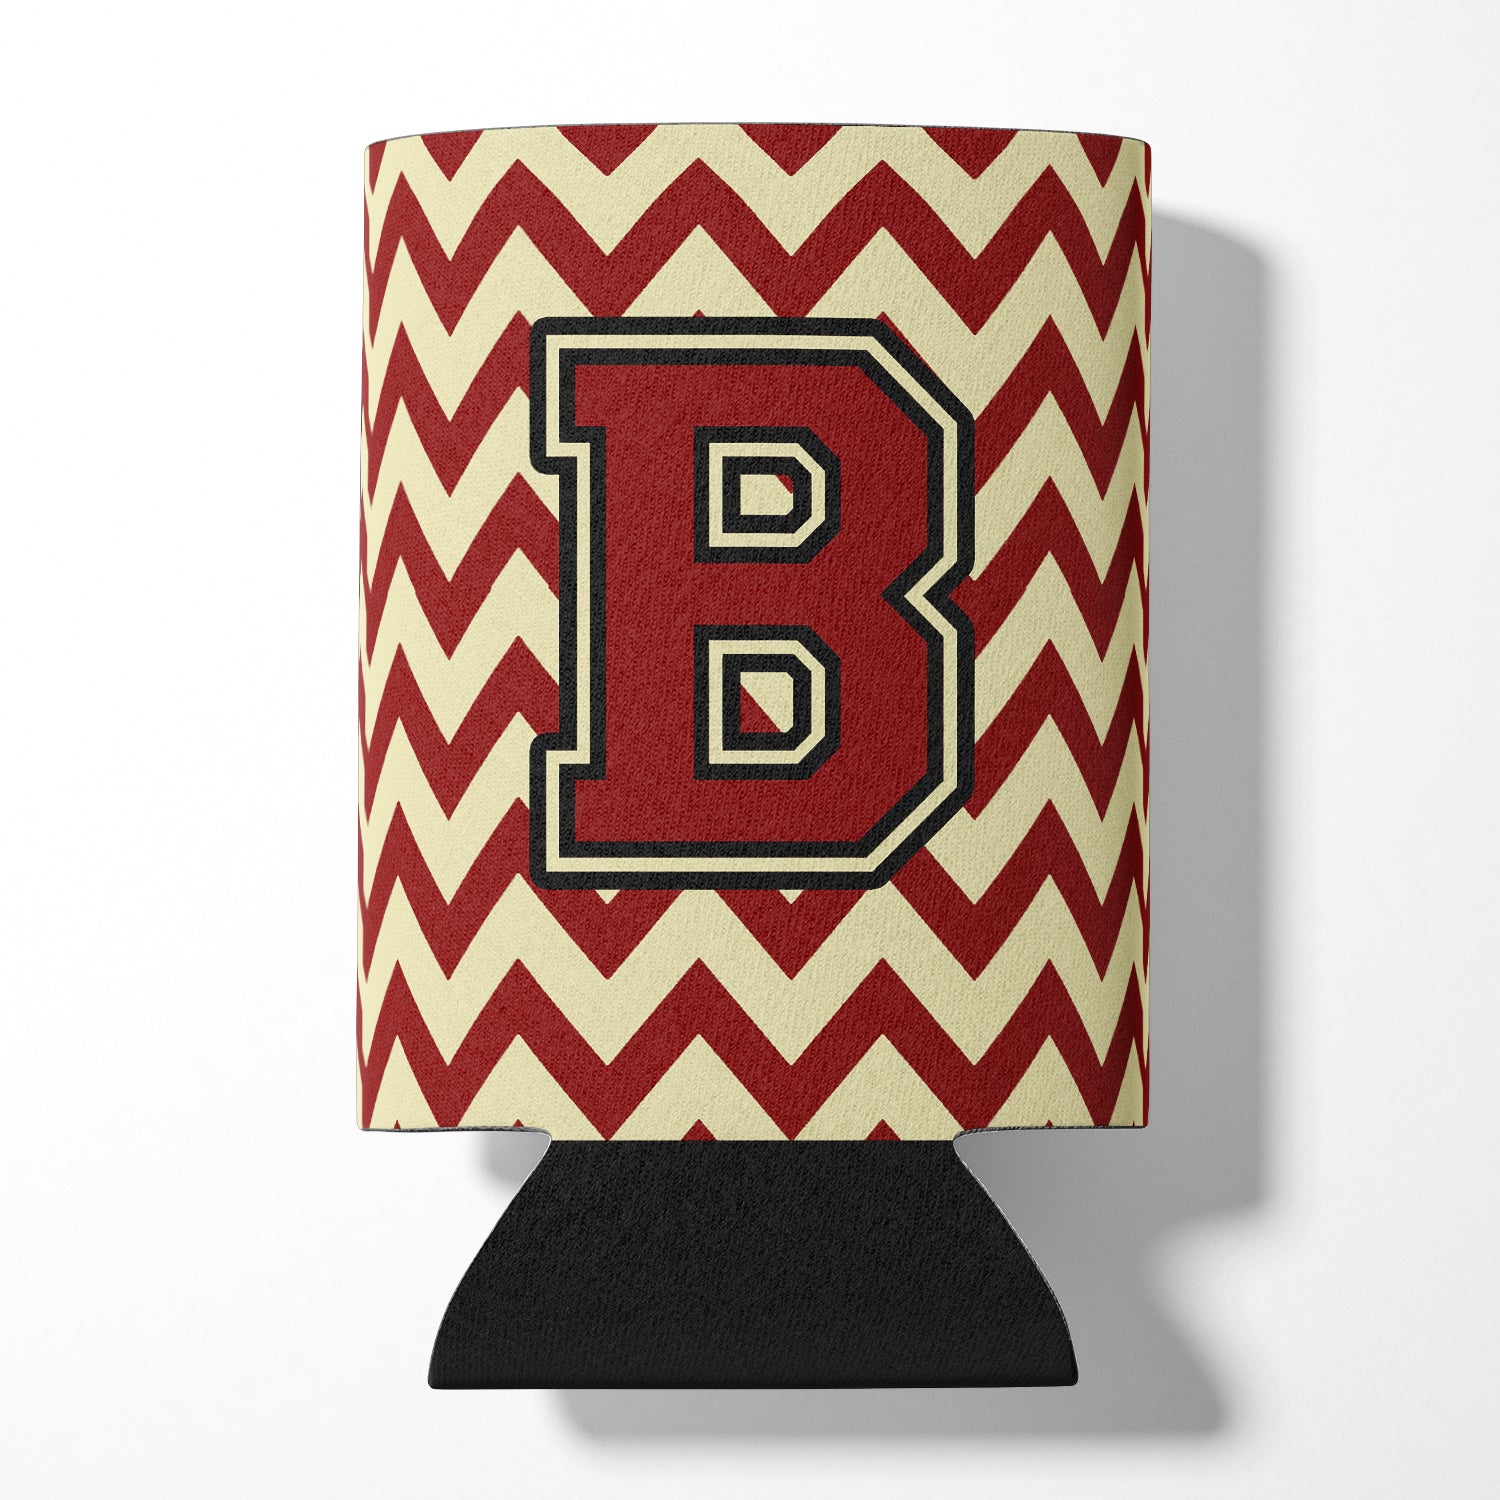 Letter B Chevron Maroon and Gold Can or Bottle Hugger CJ1061-BCC